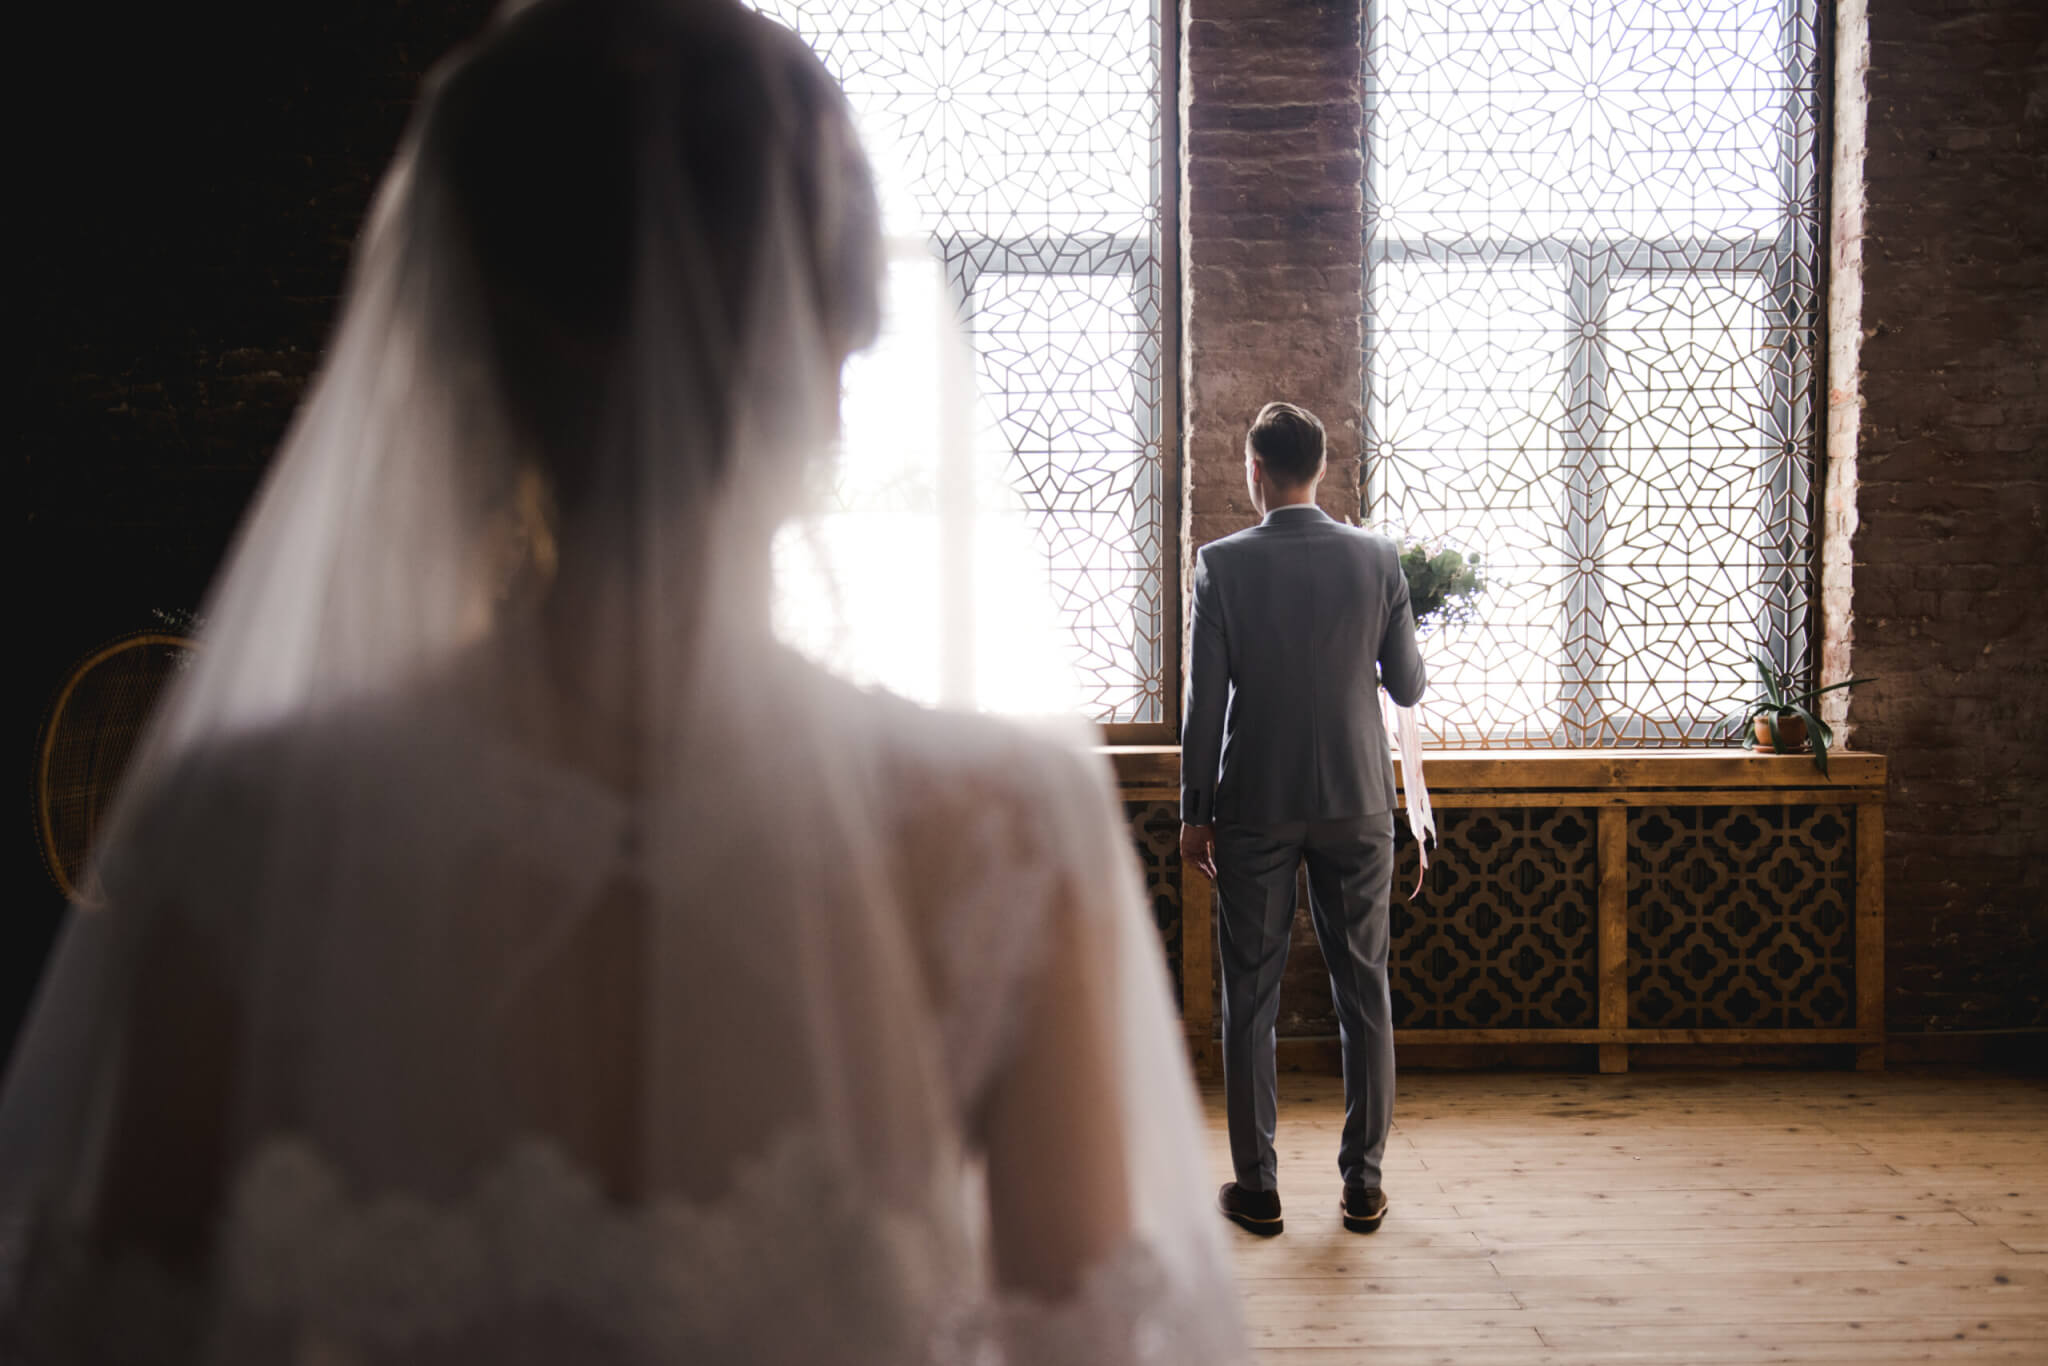 The Pros & Cons of a First Look vs. Meeting at the Altar